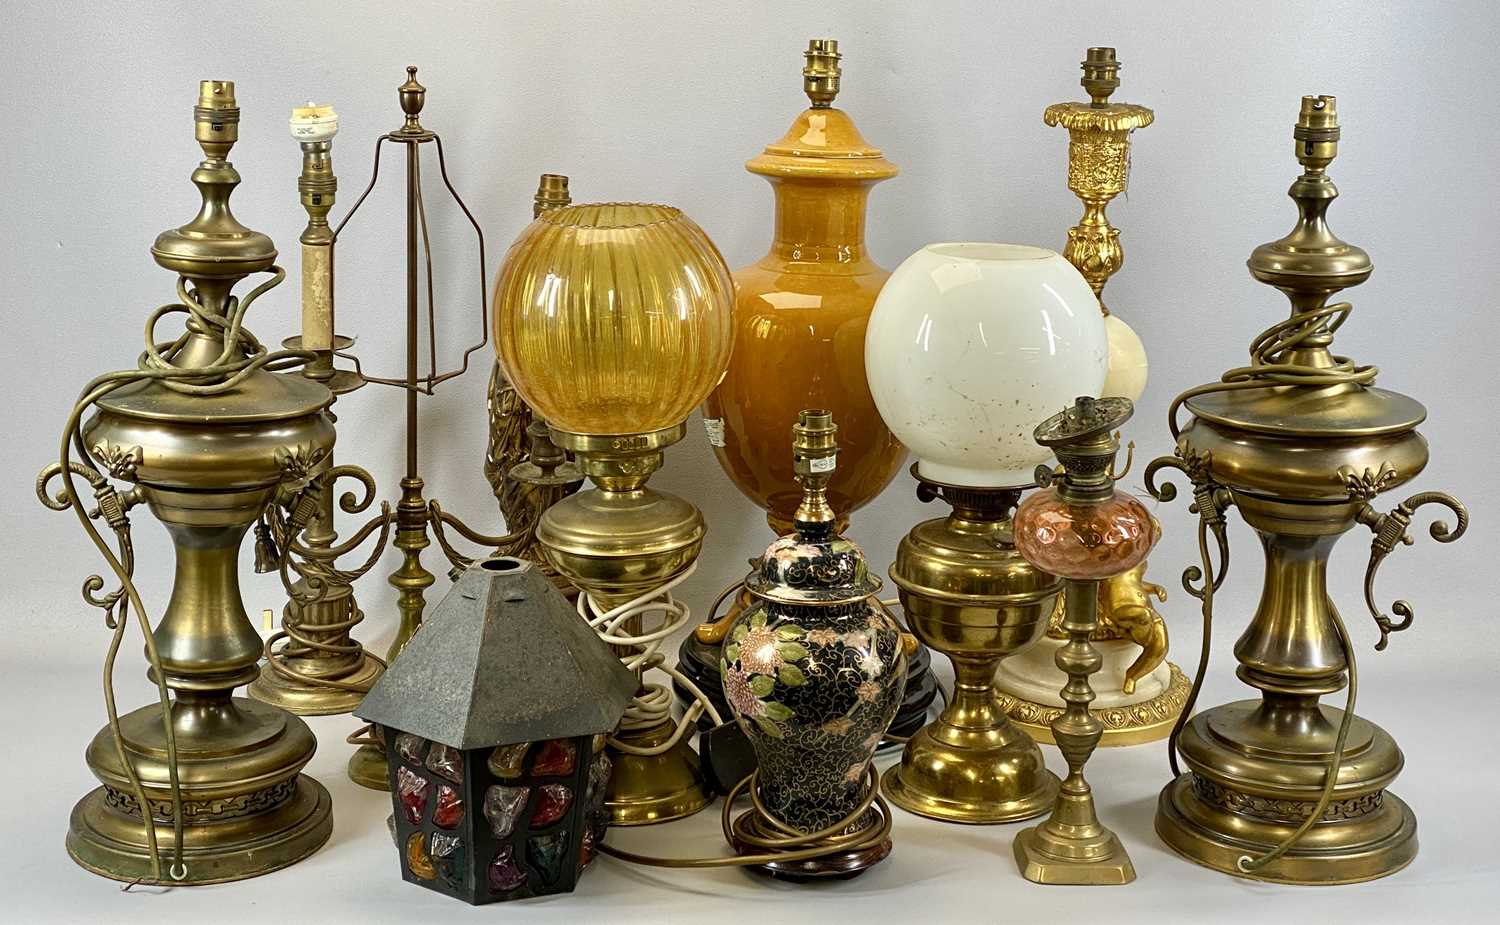 ASSORTED LAMPS & LIGHTING including ornate gilt metal and alabaster table lamp with a figure of